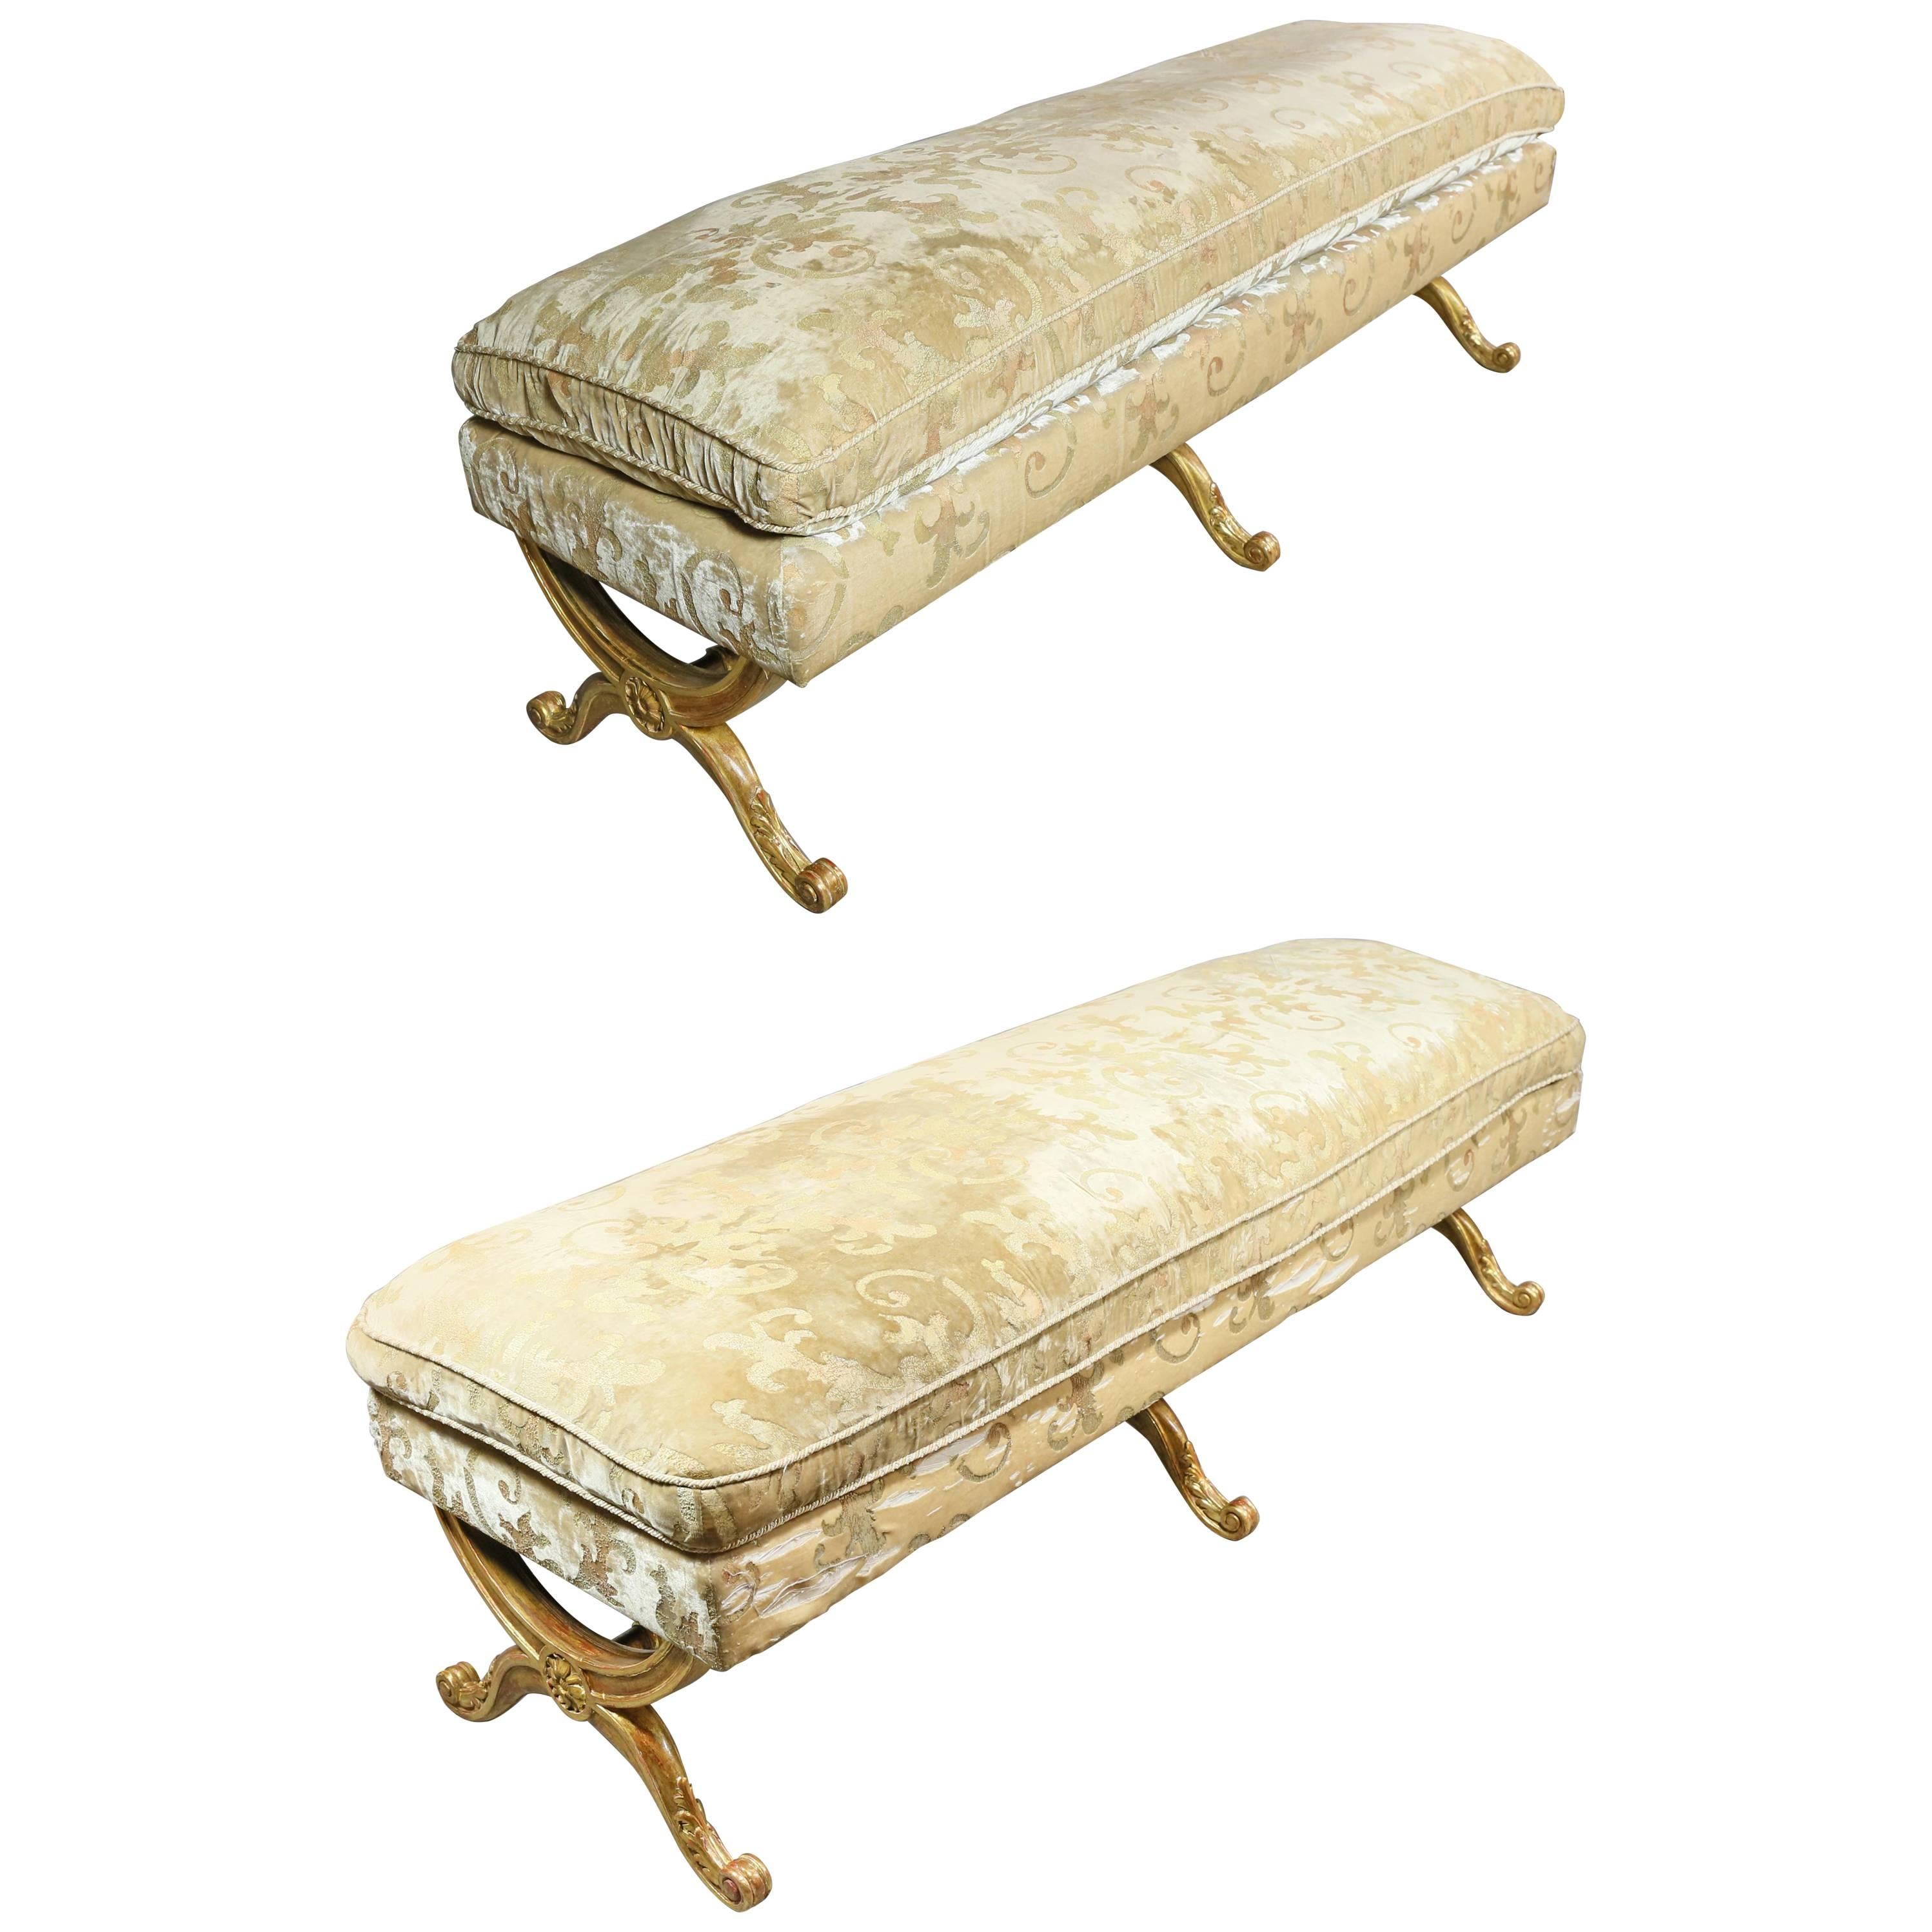 Pair of Louis XVI Style Giltwood Benches with Mirella Spinella Upholstery